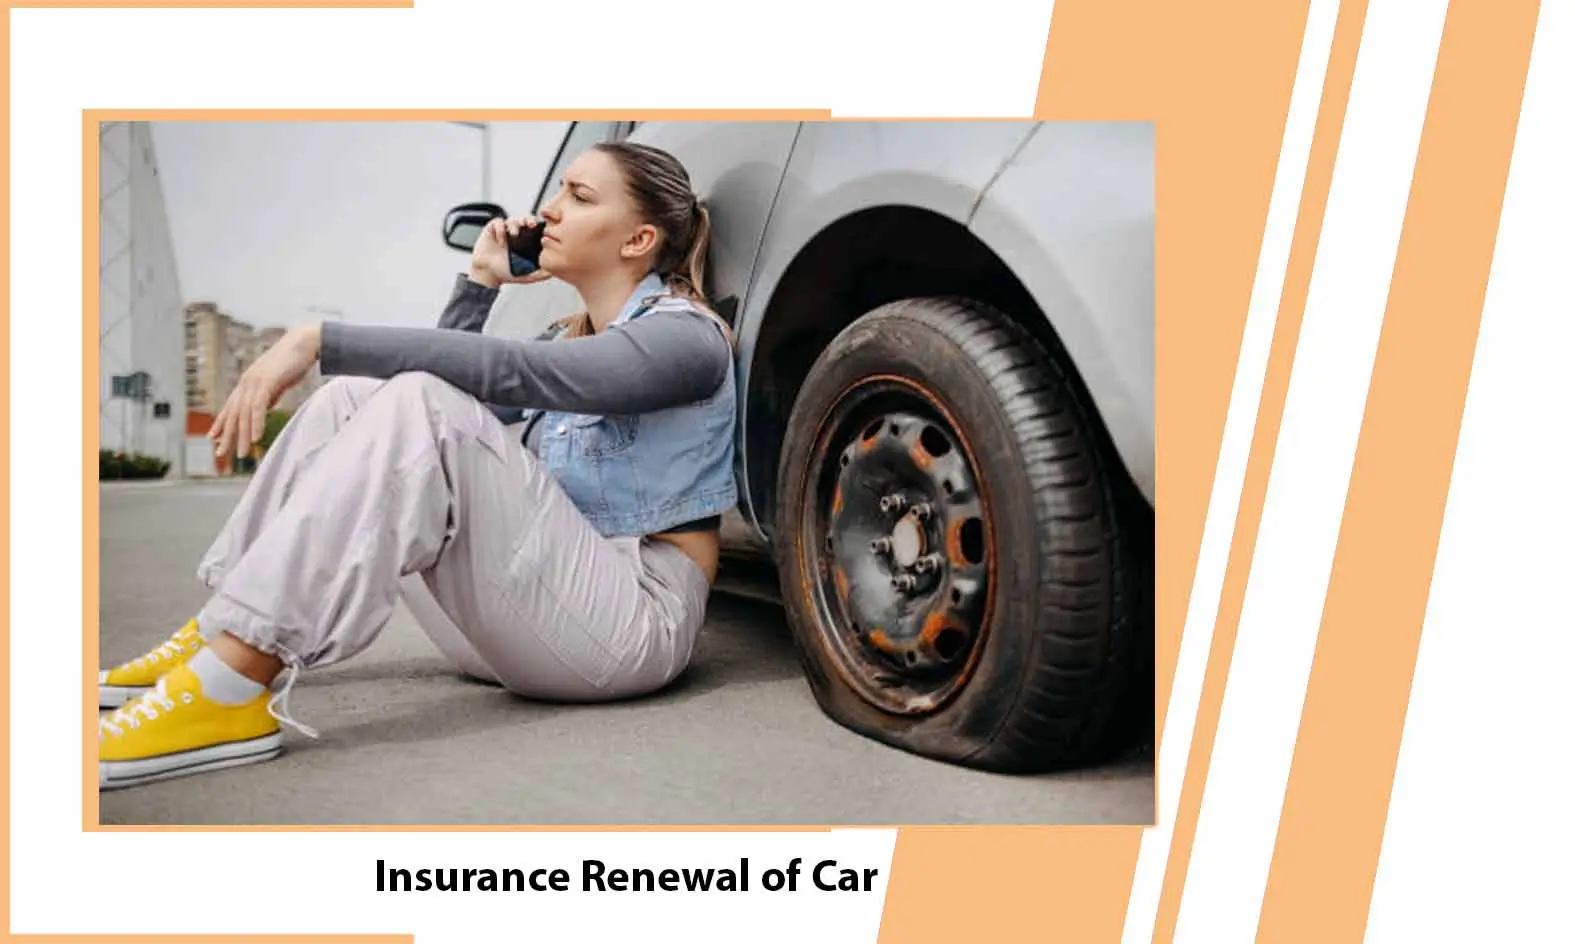 Insurance Renewal of Car - What it is and When to Renew?